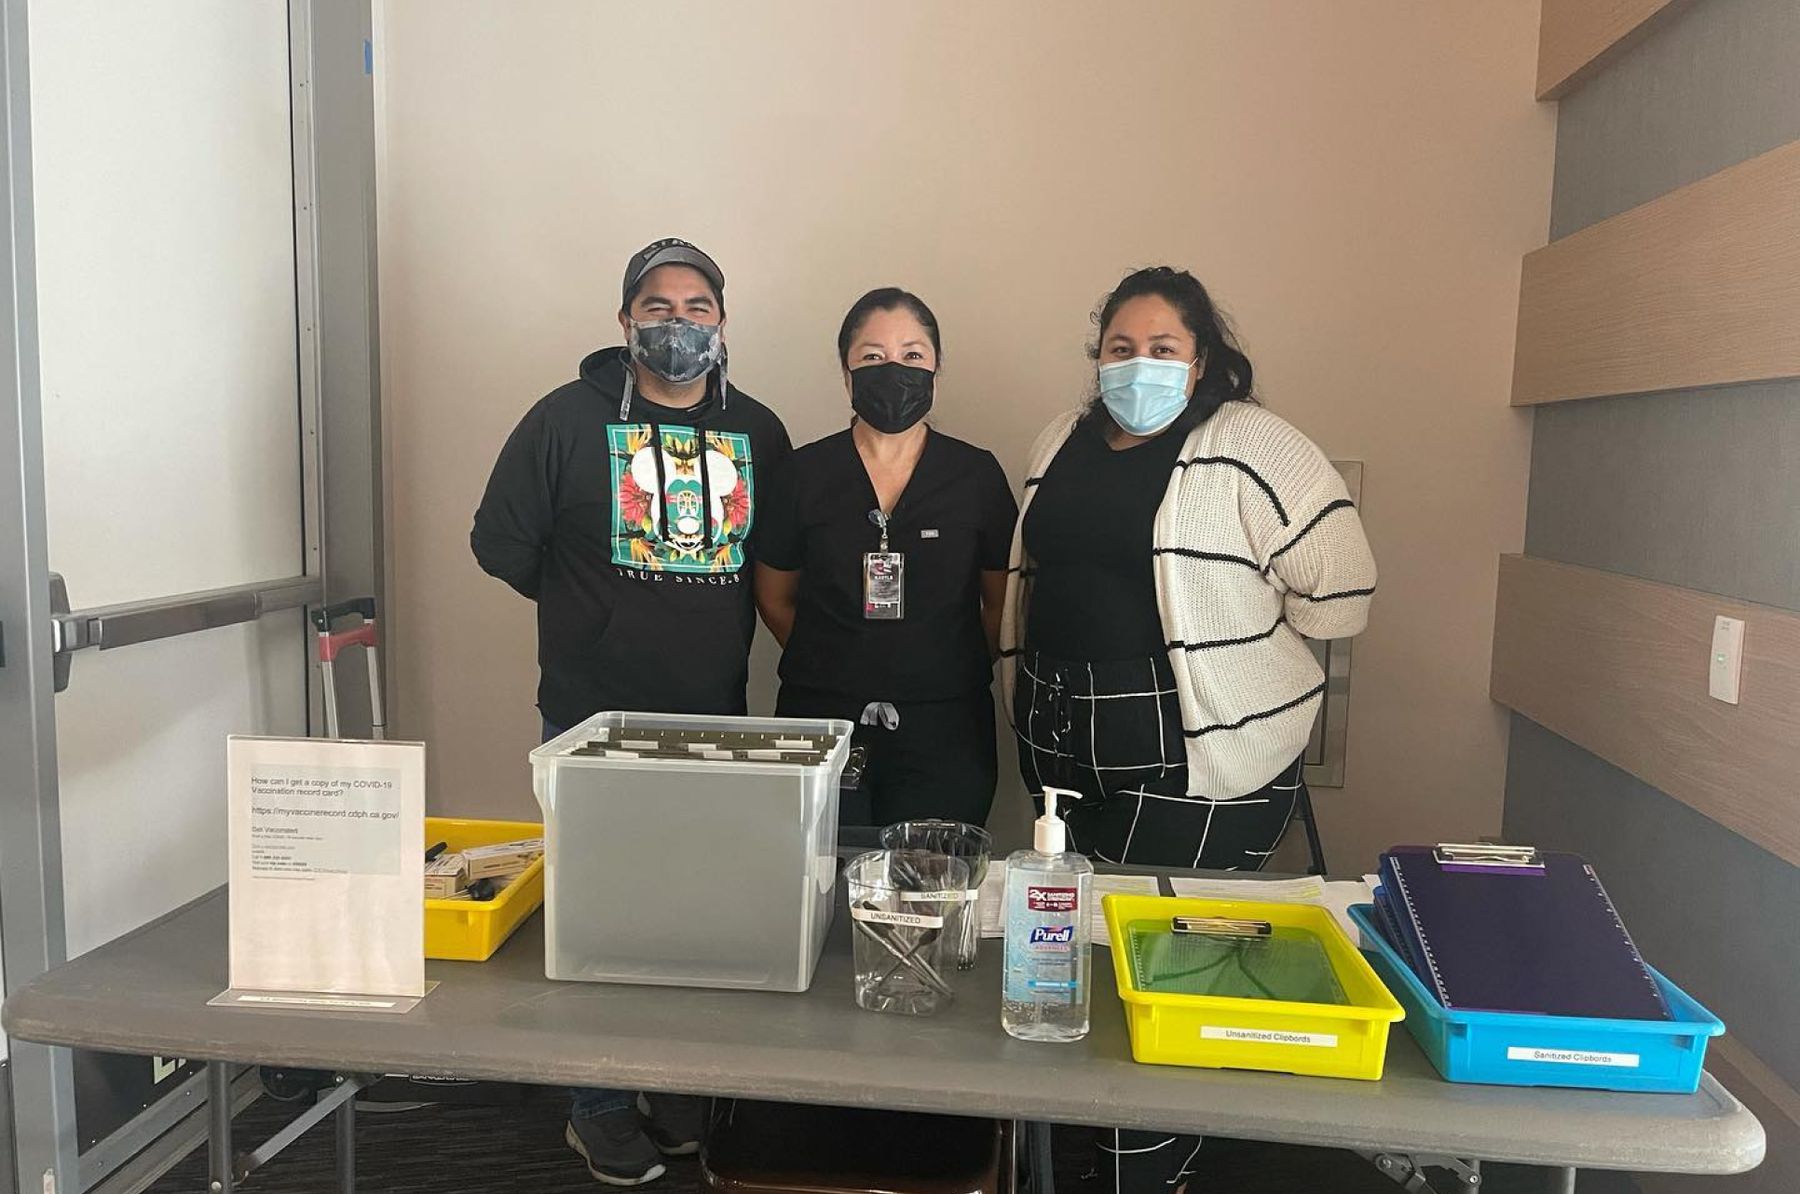 Three masked people with ID badges stand behind a check-in table with files, pens, clipboards, and hand sanitizer.